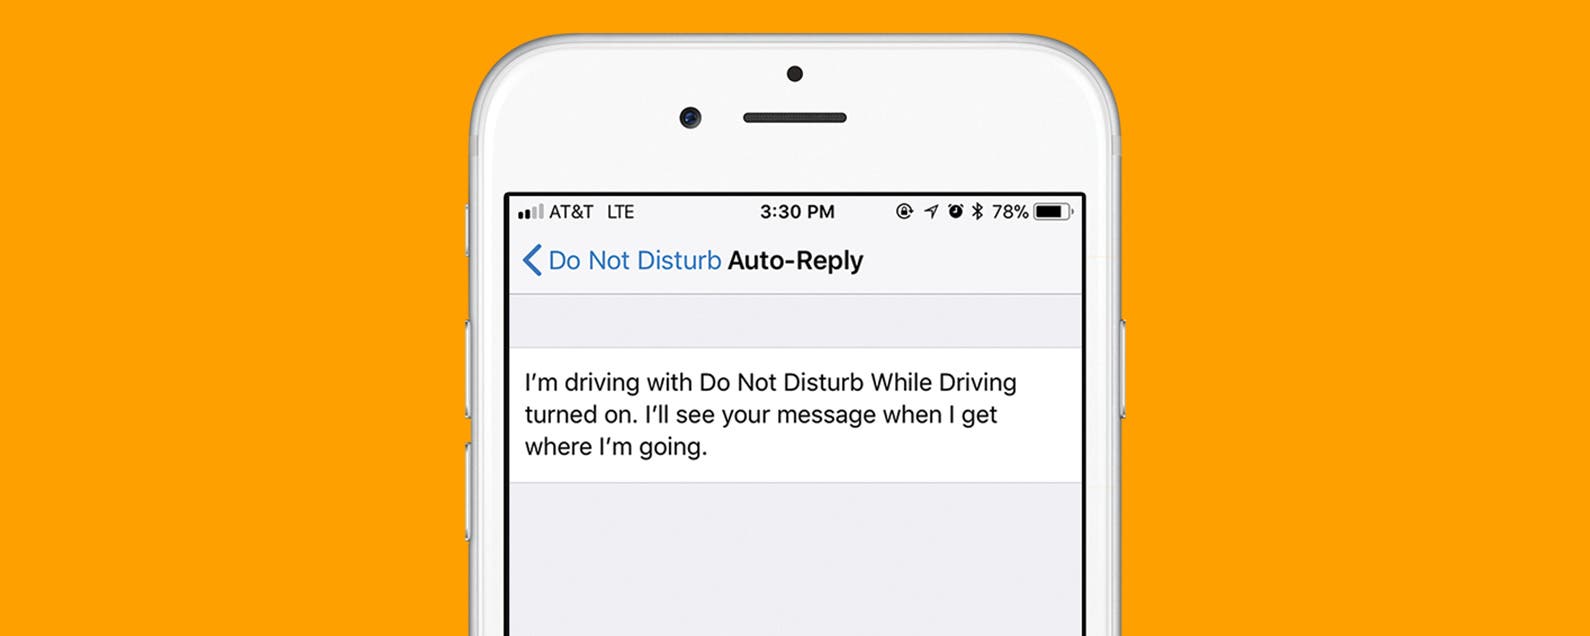 How to Use Do Not Disturb While Driving on iPhone (UPDATED FOR iOS 12)